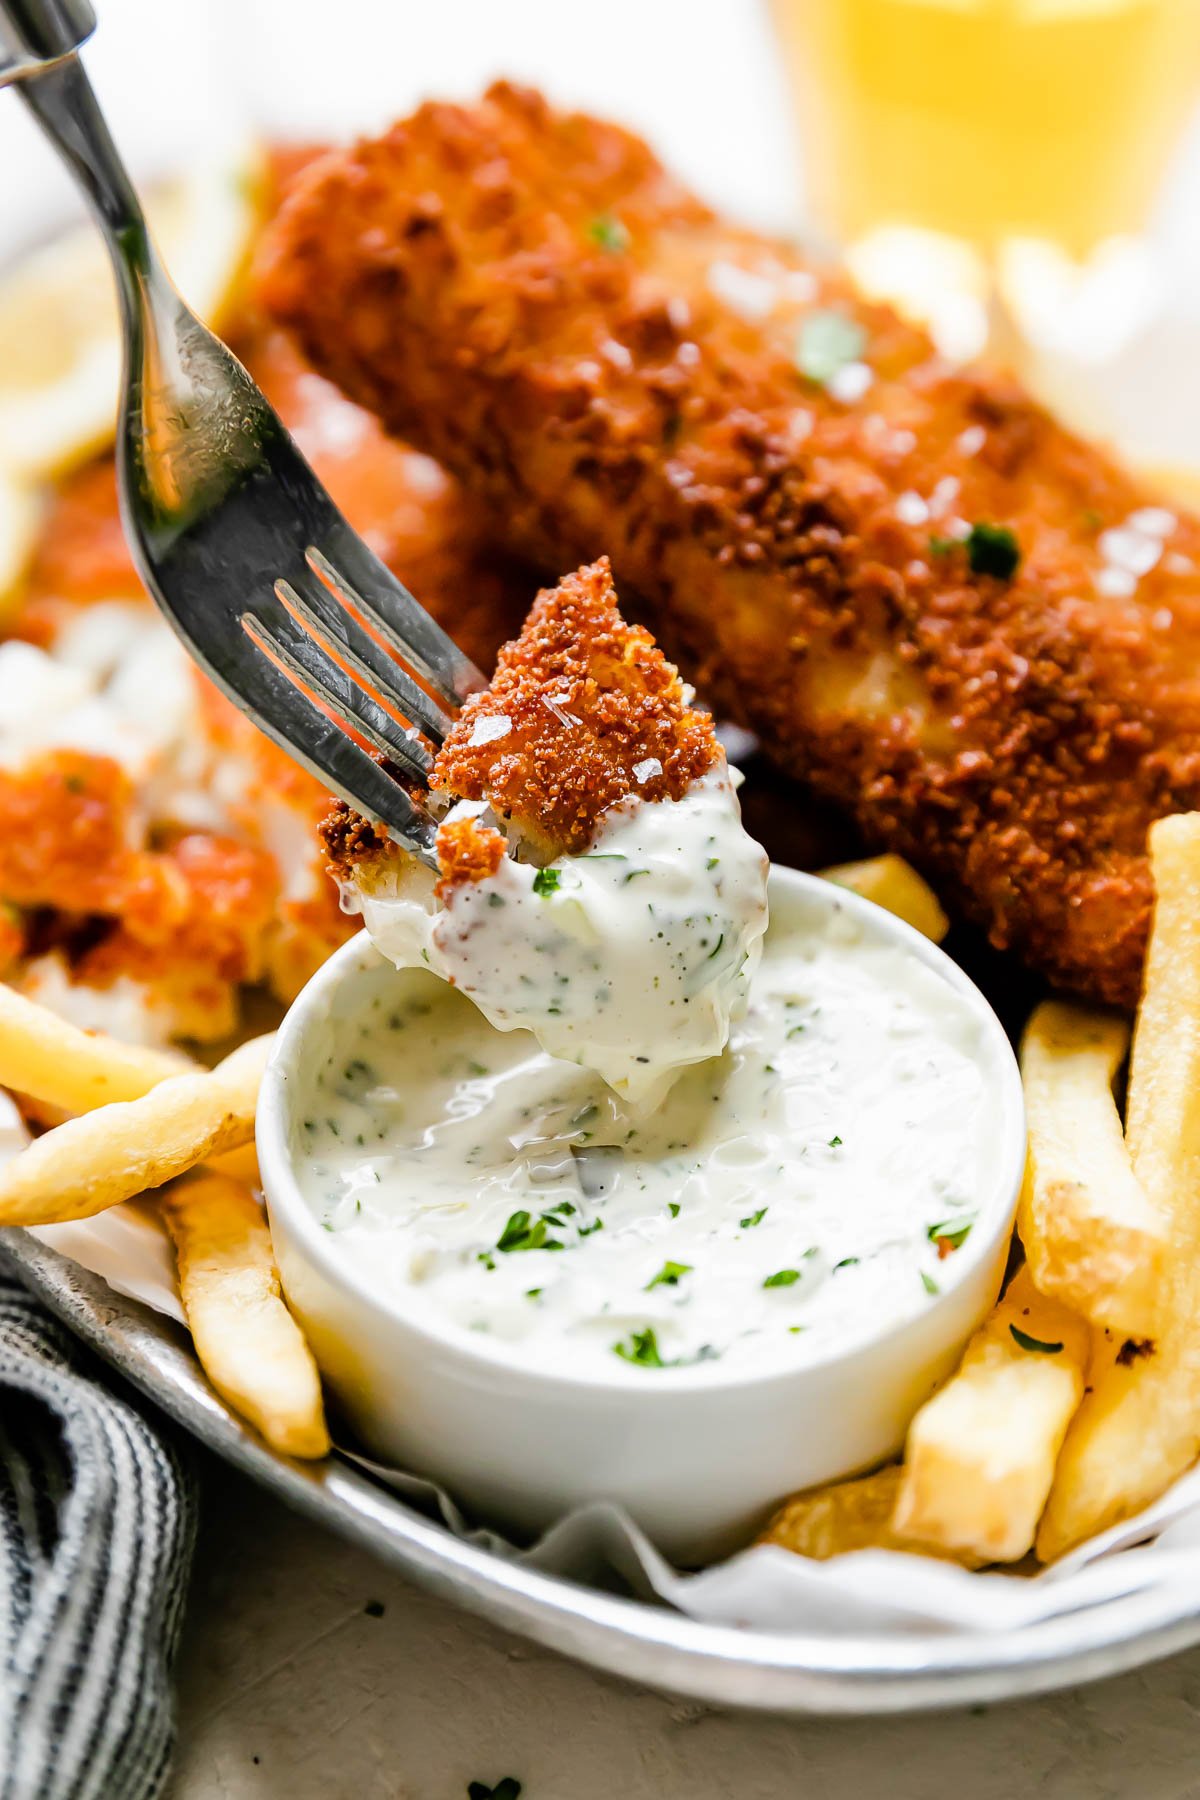 A side angle shot of fish fry pieces arranged atop a metal oval tray that sits atop a creamy white textured surface. The fish has been garnished with fresh parsley and flaky sea salt and is served alongside lemon wedges, french fries, and a small bowl of tartar sauce. A fork holds a piece of fried fish and dips it into the small white bowl filled with tartar sauce that sits atop the tray. A blue and white striped linen napkin rests alongside the tray.